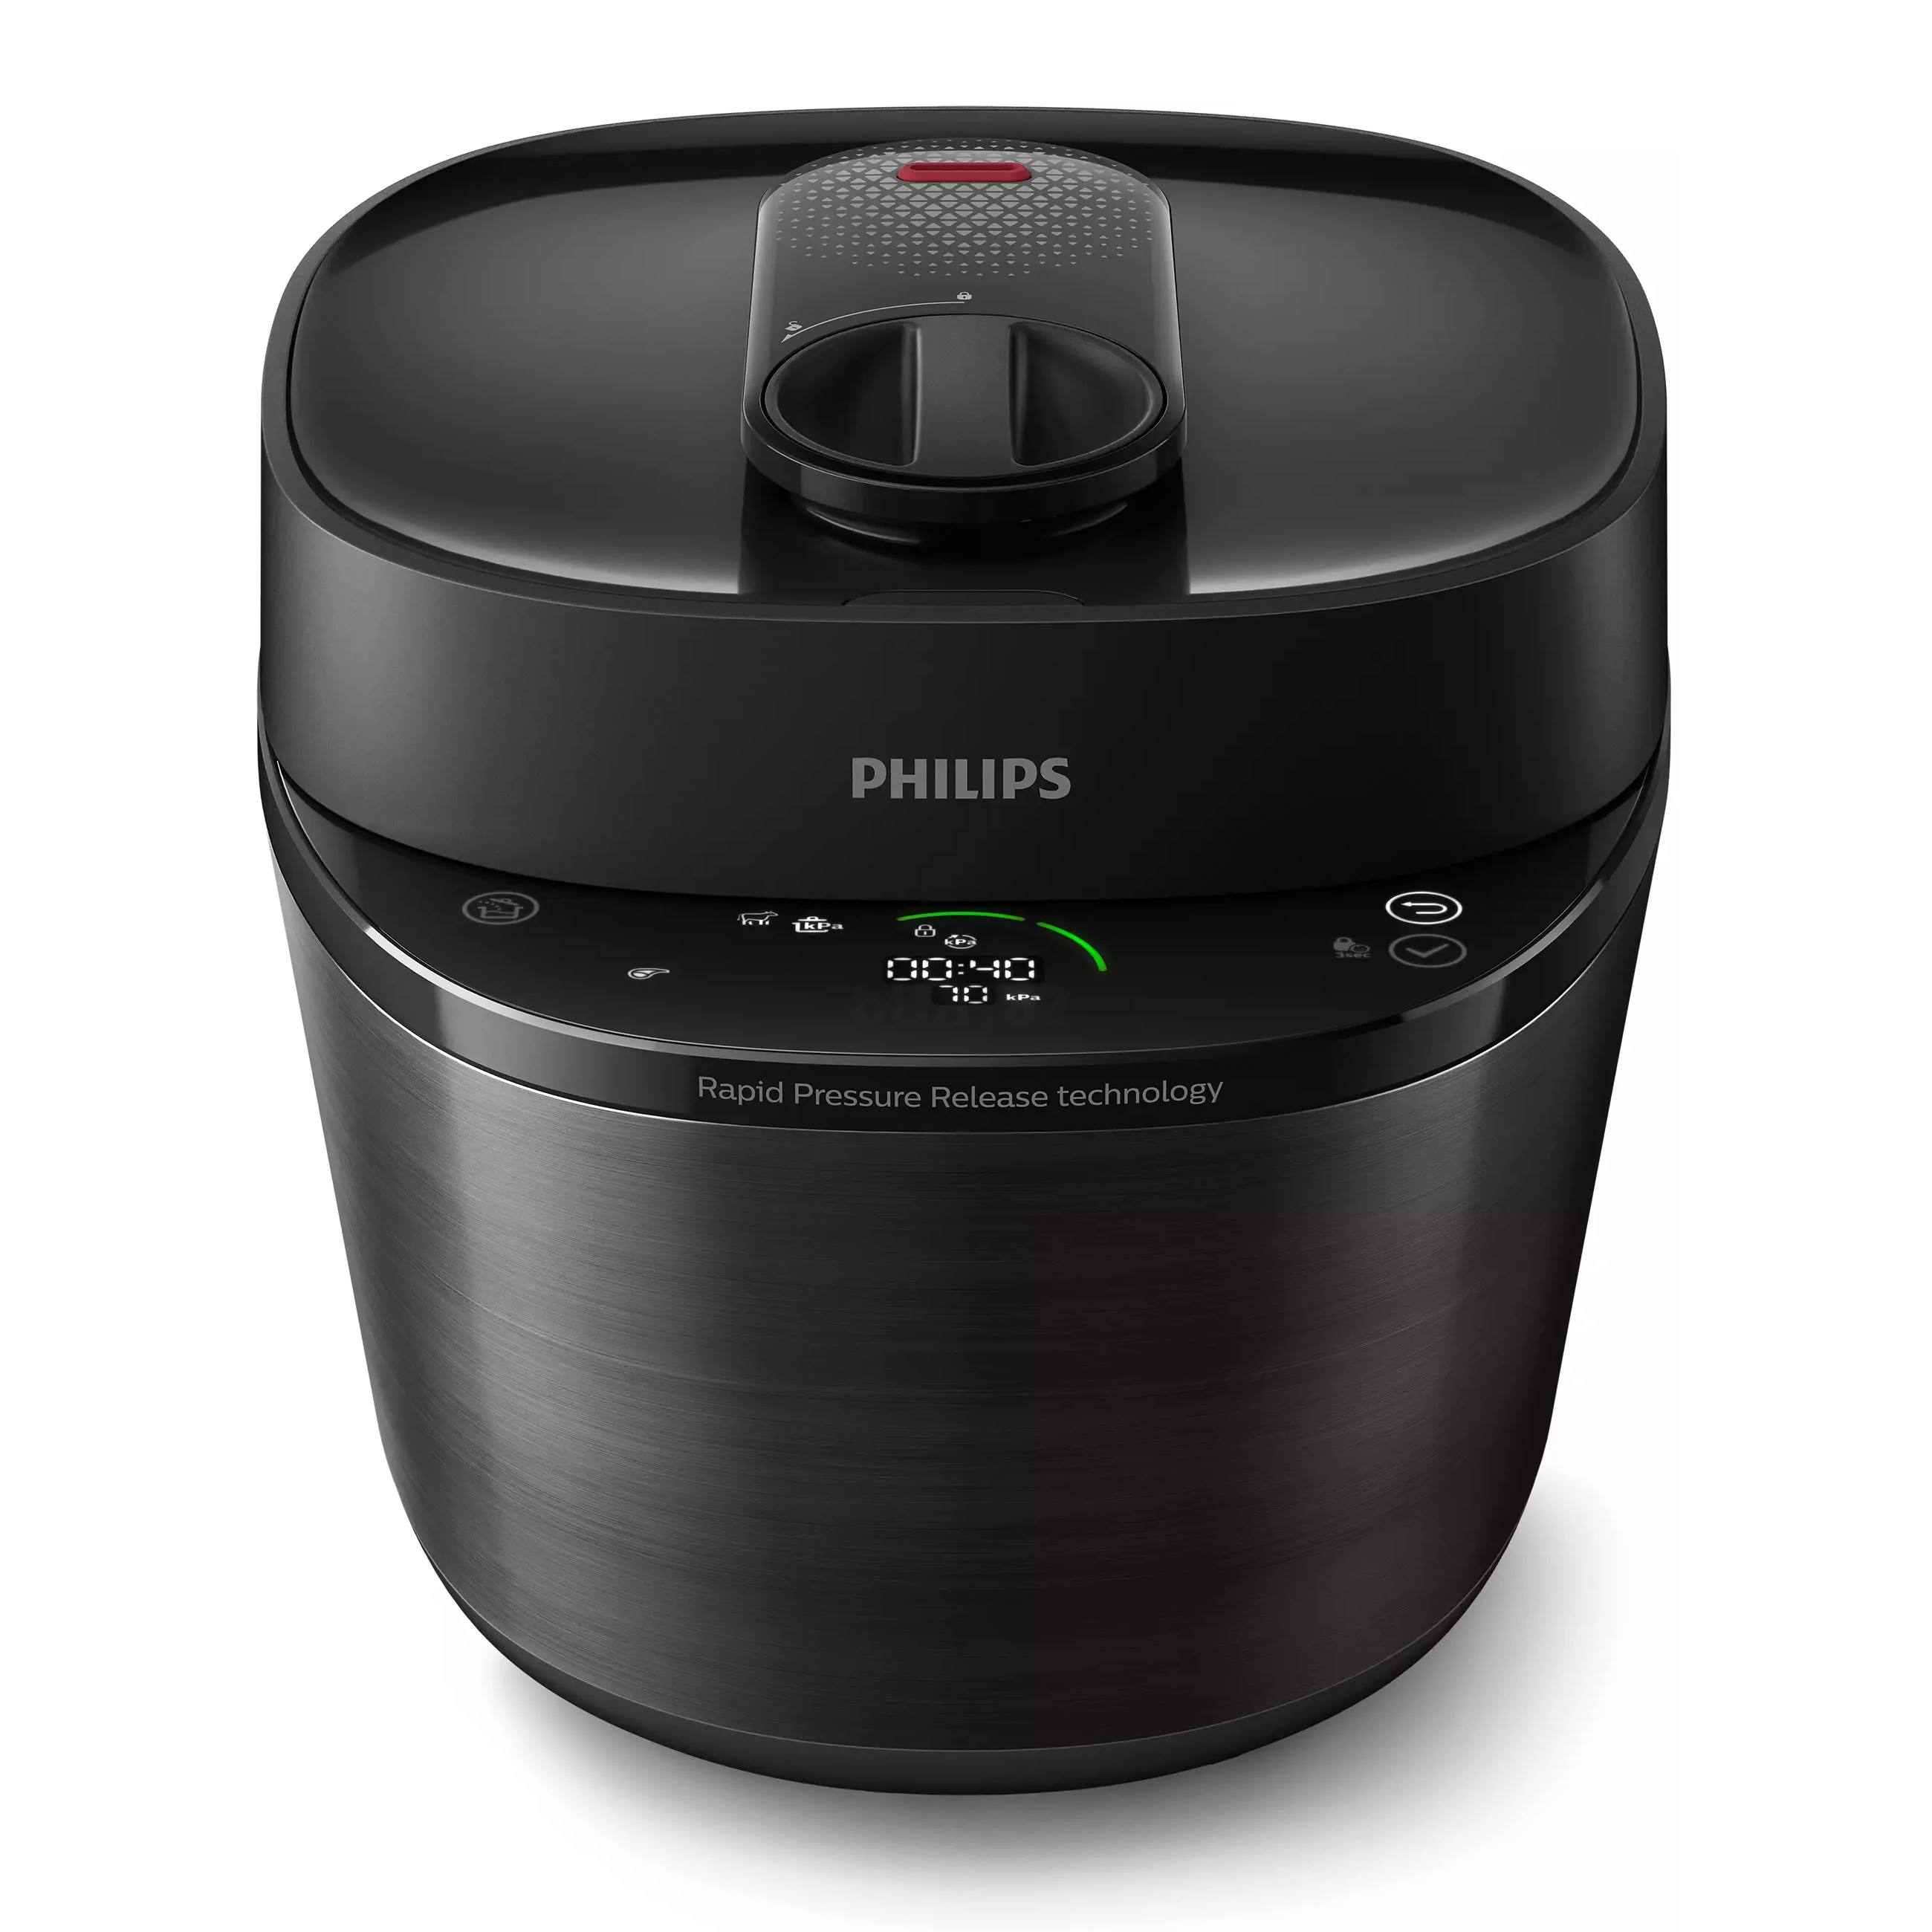 PHILIPS [12]ALL-IN-ONE智能萬用鍋 HD2151/80 黑色